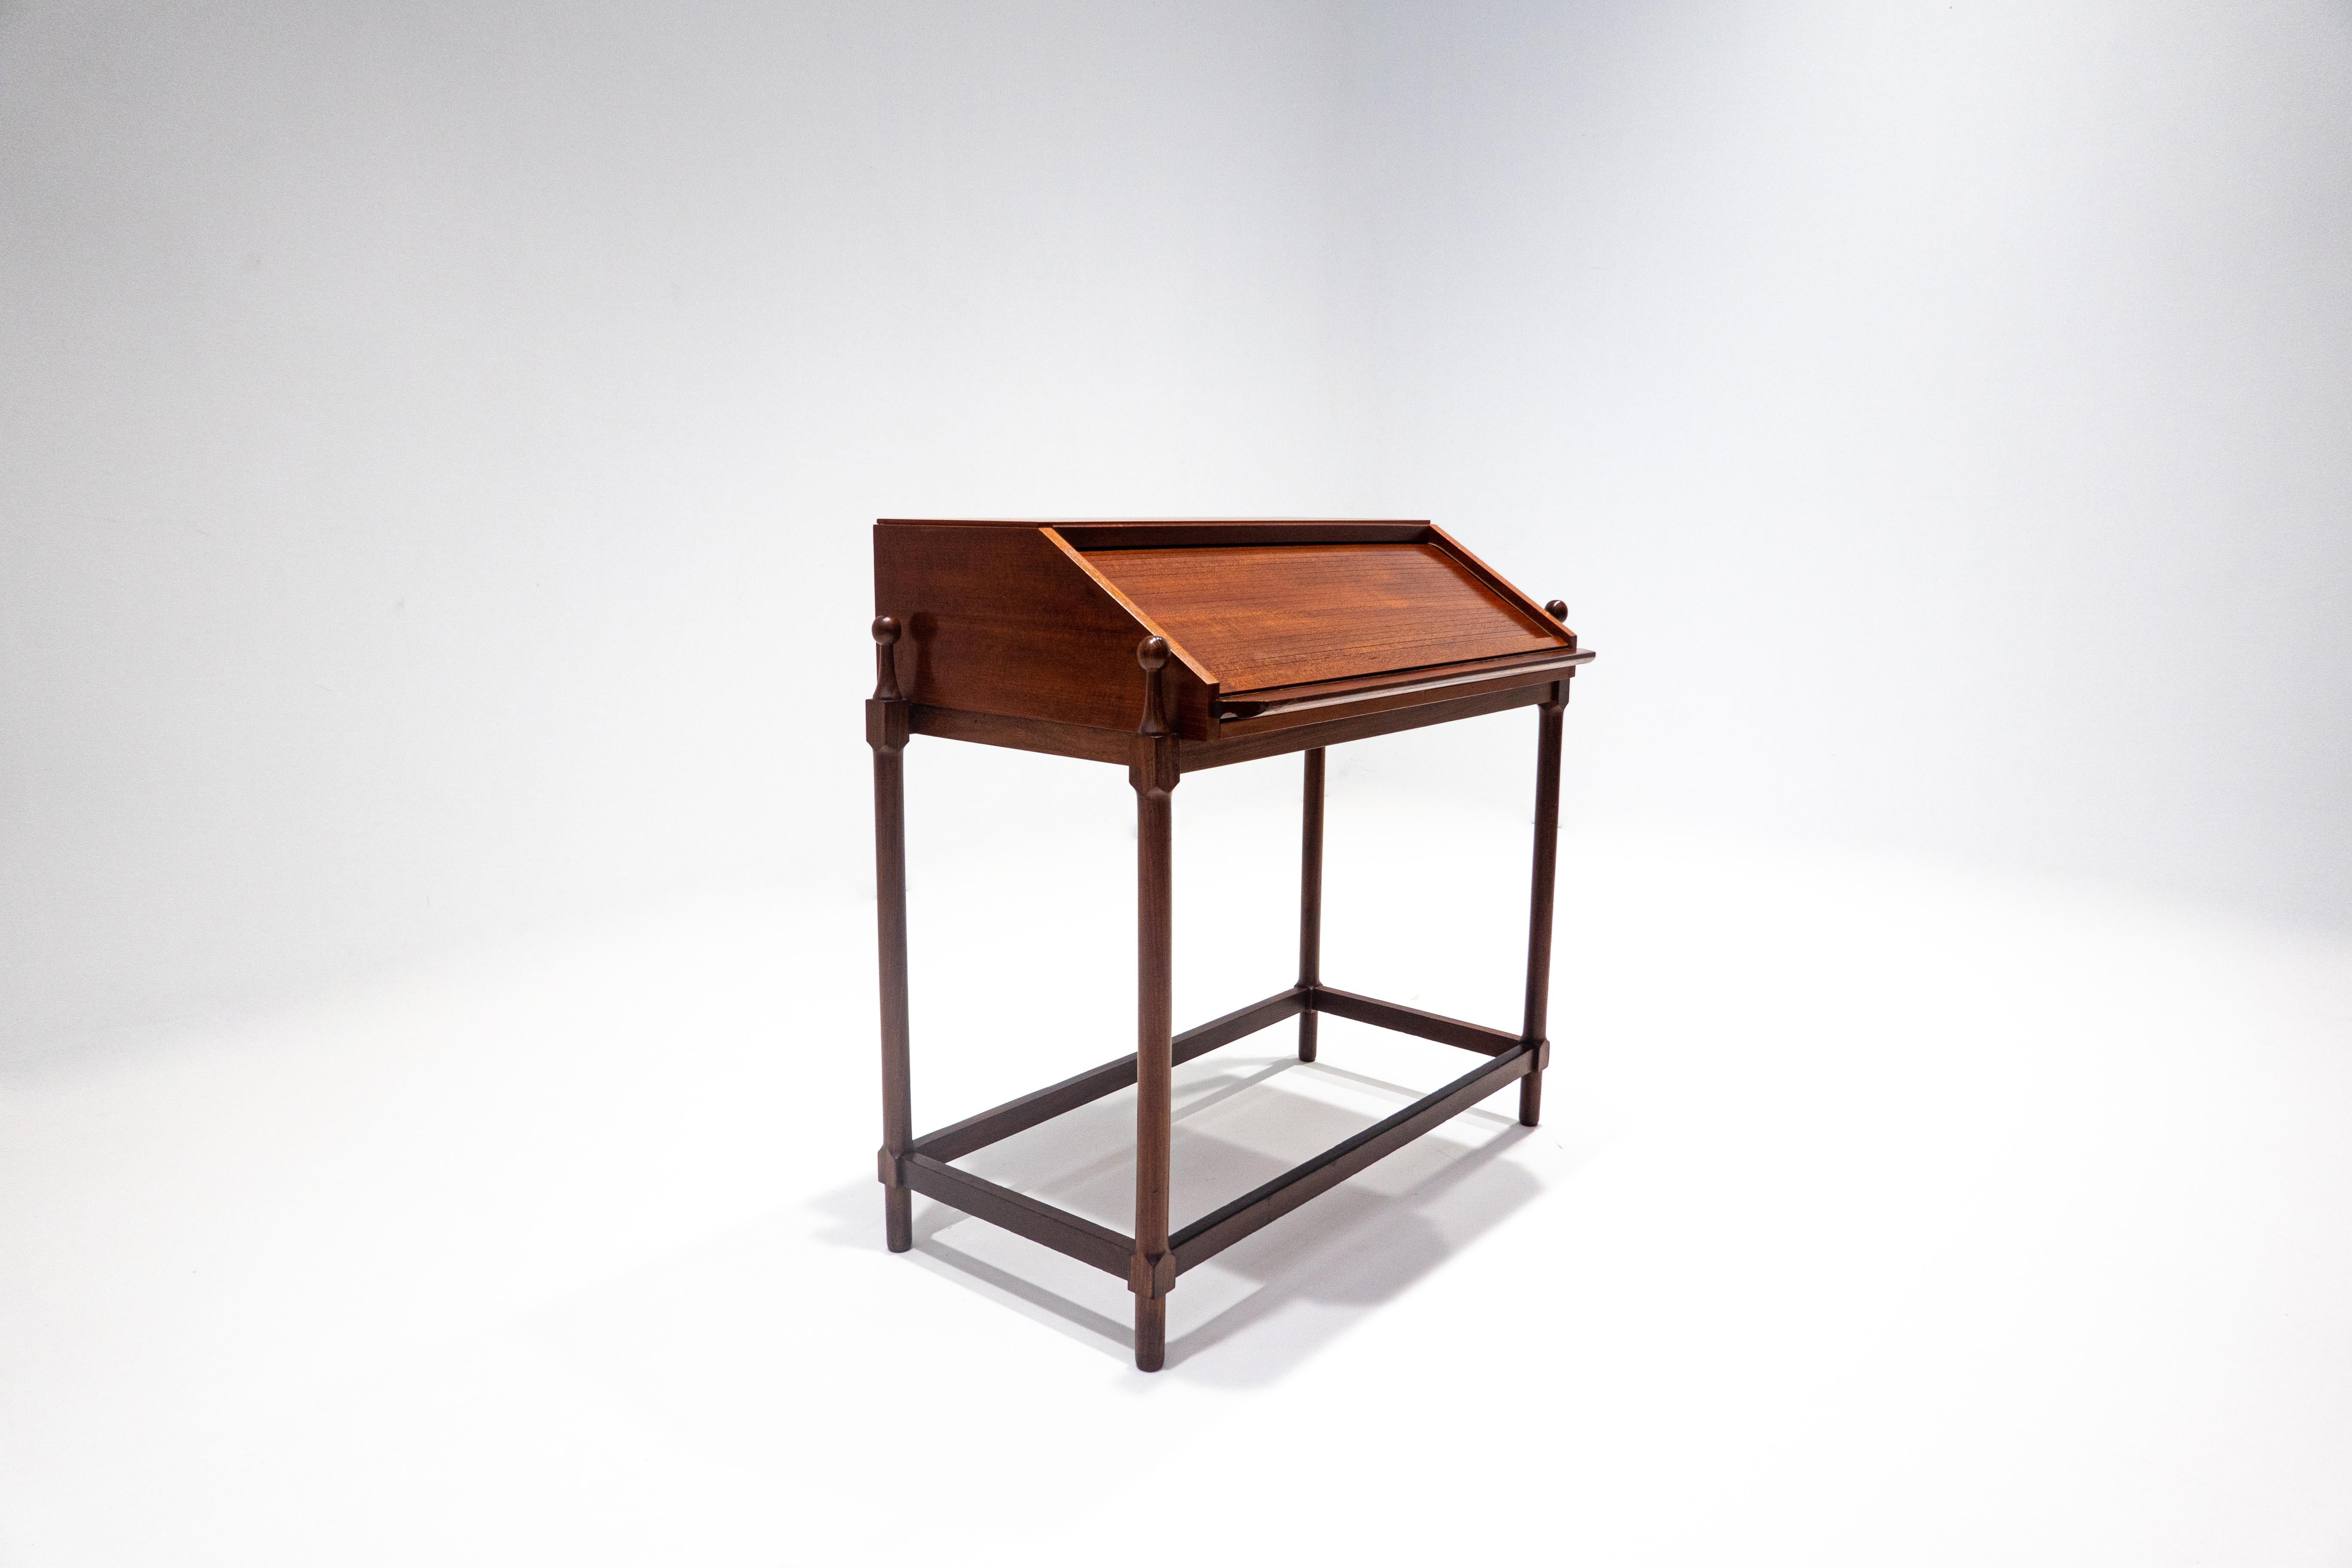 Mid-Century Modern wooden writing desk by Fratelli Proserpio, Italy, 1960s.